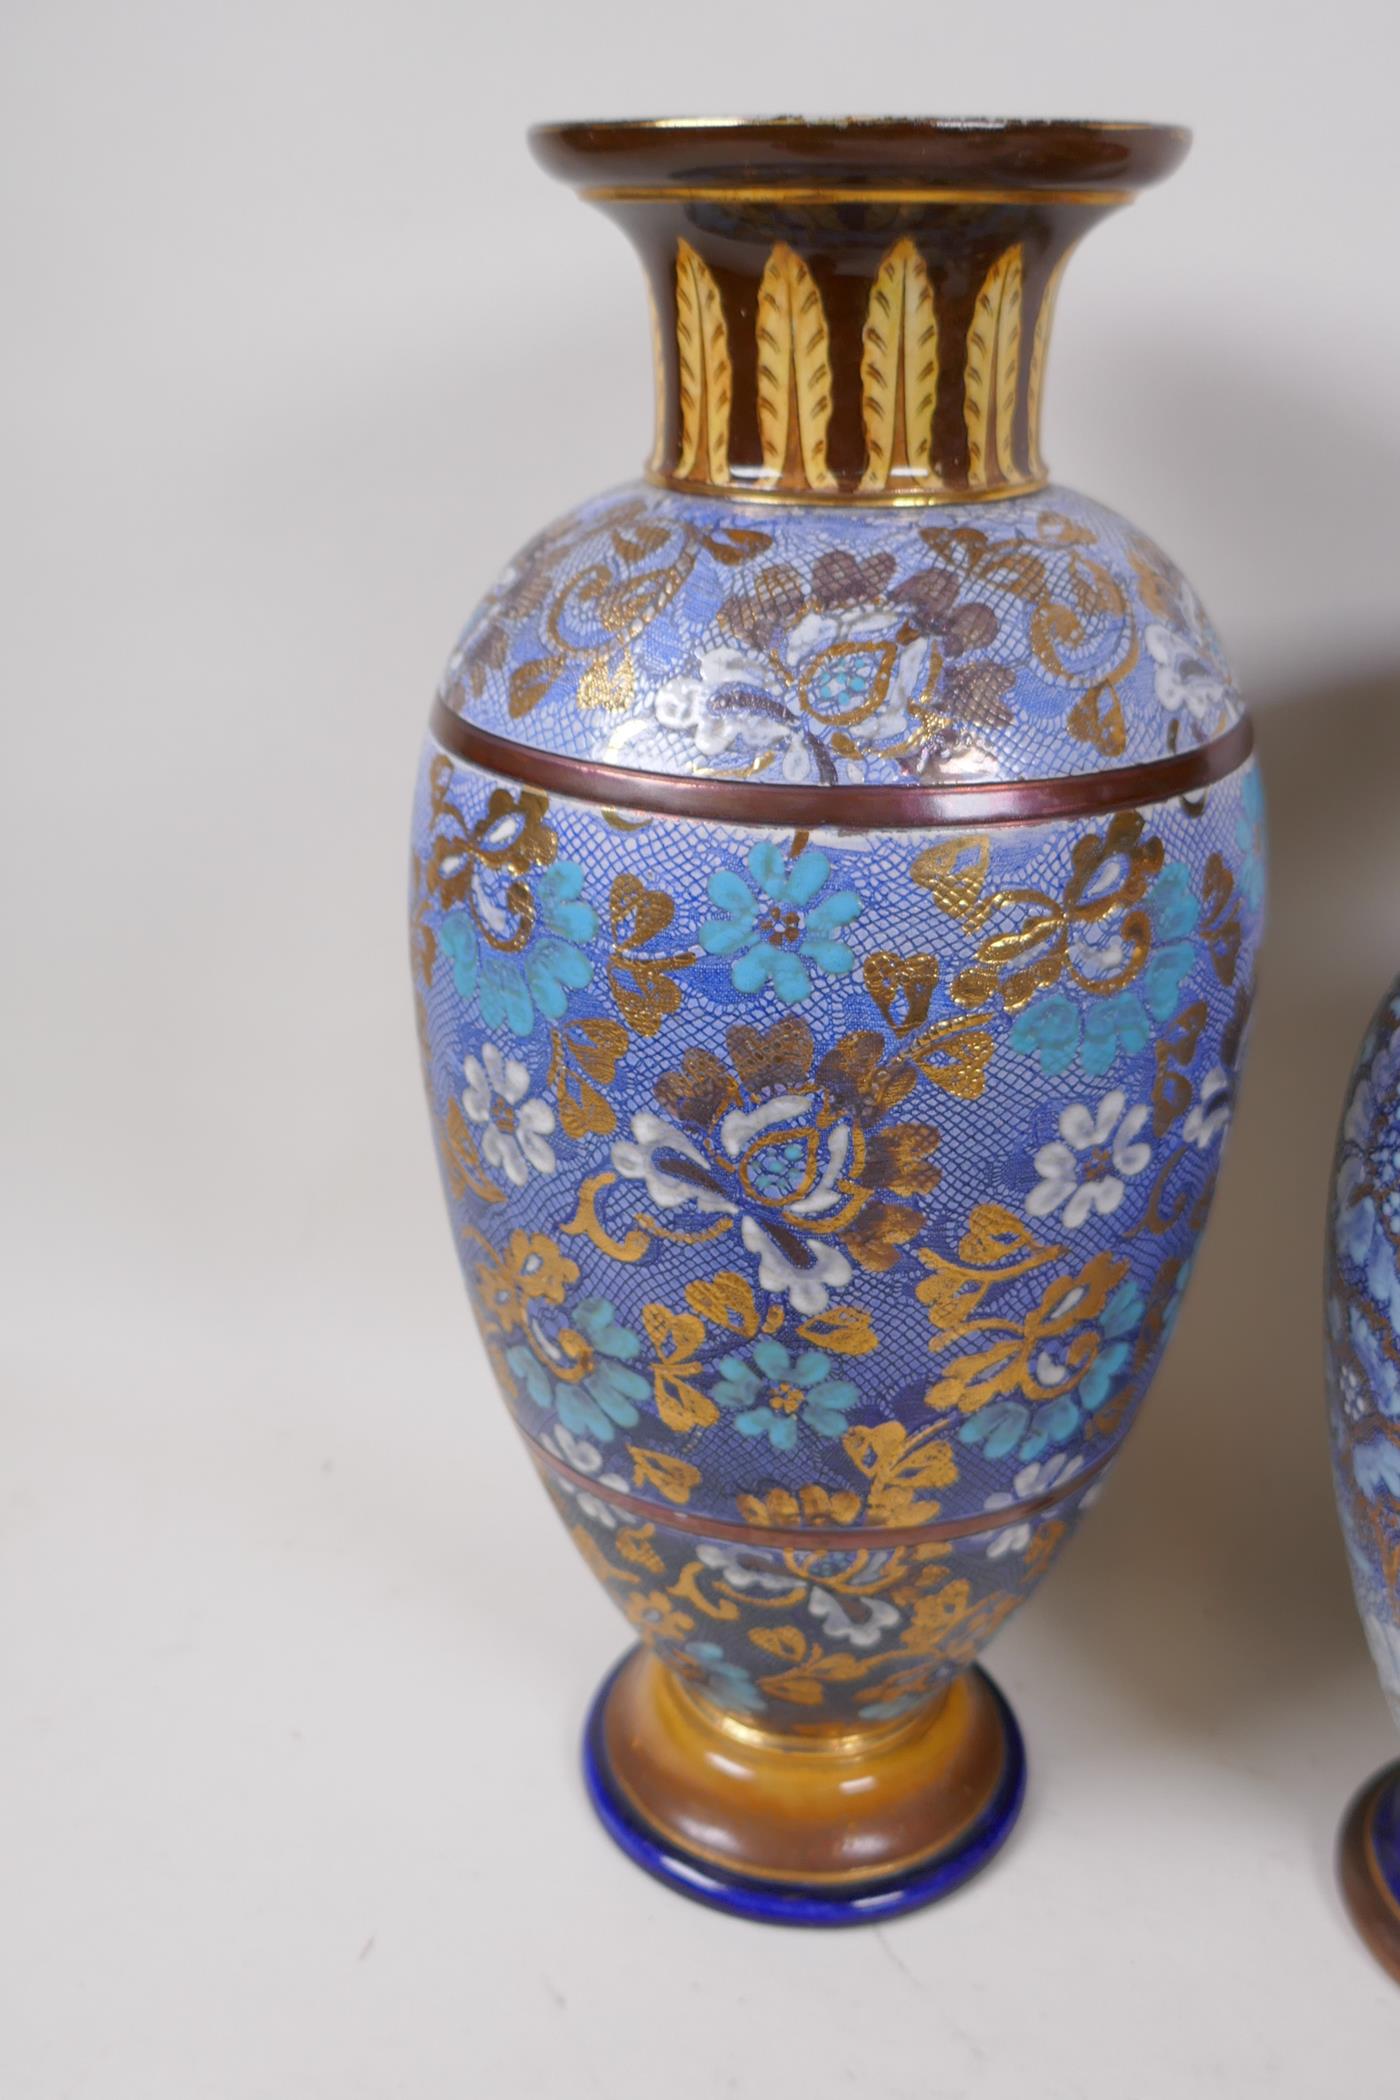 Two Doulton Lambeth Slaters patent vases, largest 33cm high, a pair of Royal Doulton Slaters - Image 6 of 6